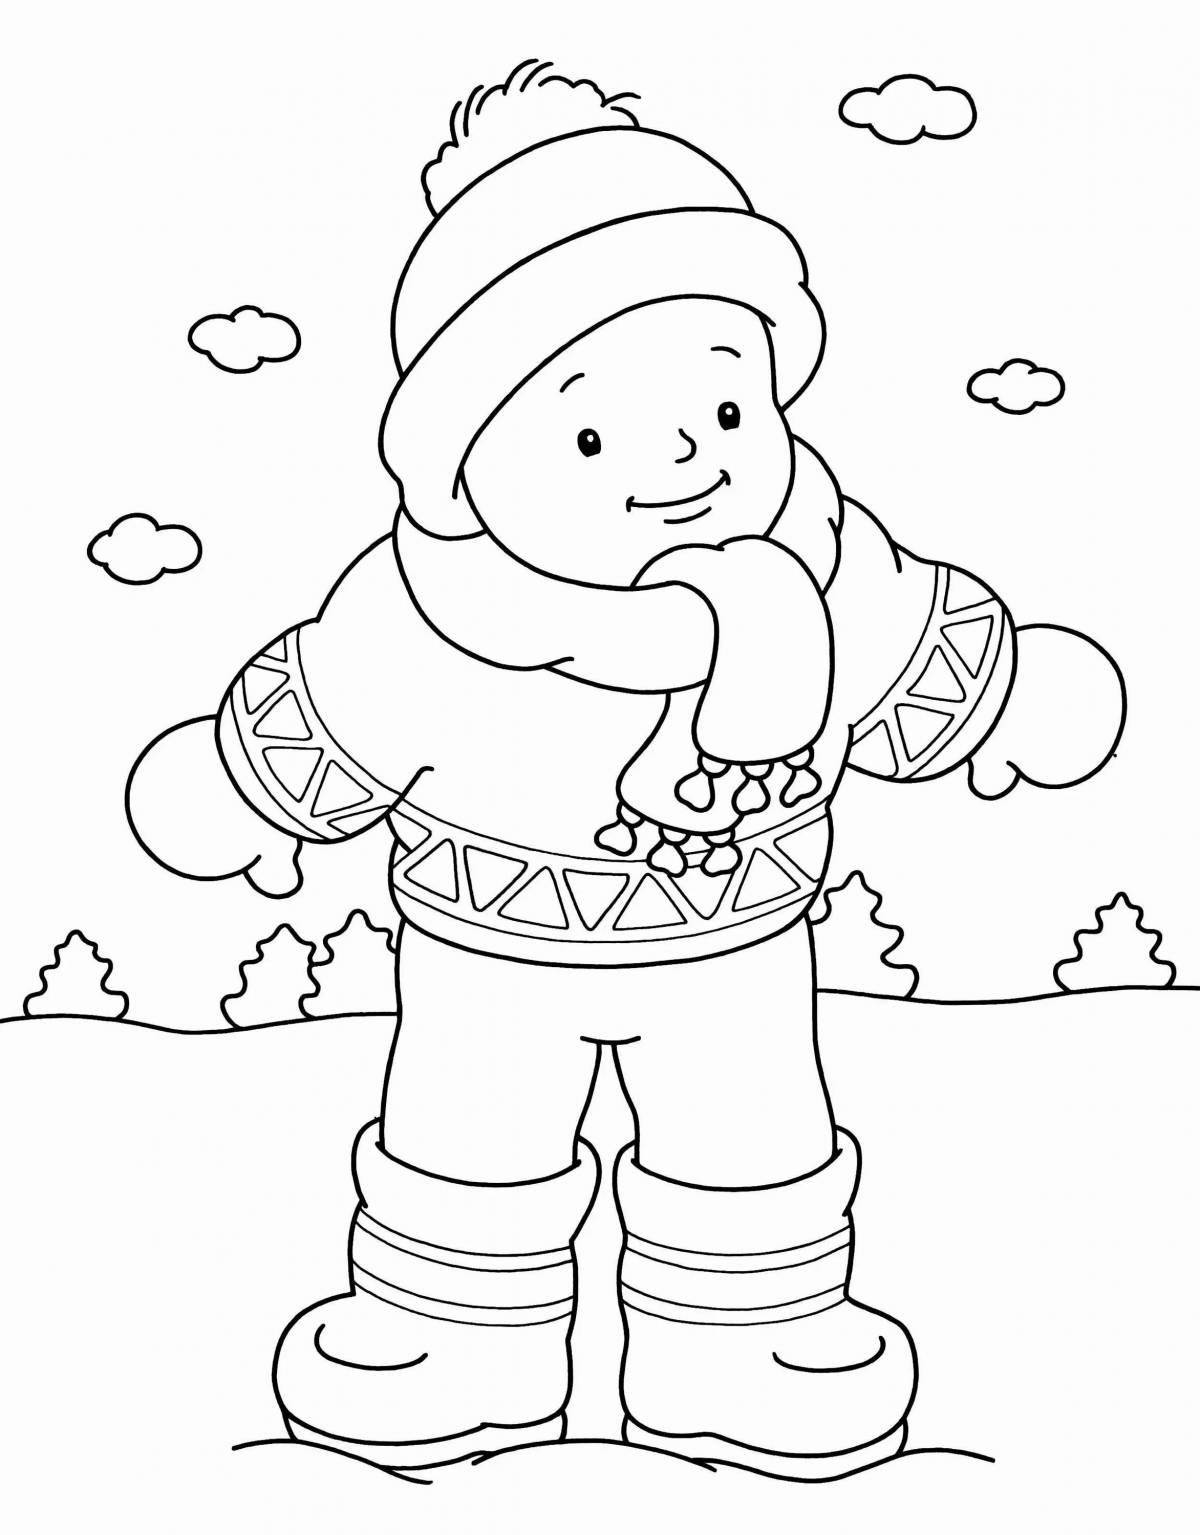 Coloring for bright winter clothes for children 6-7 years old